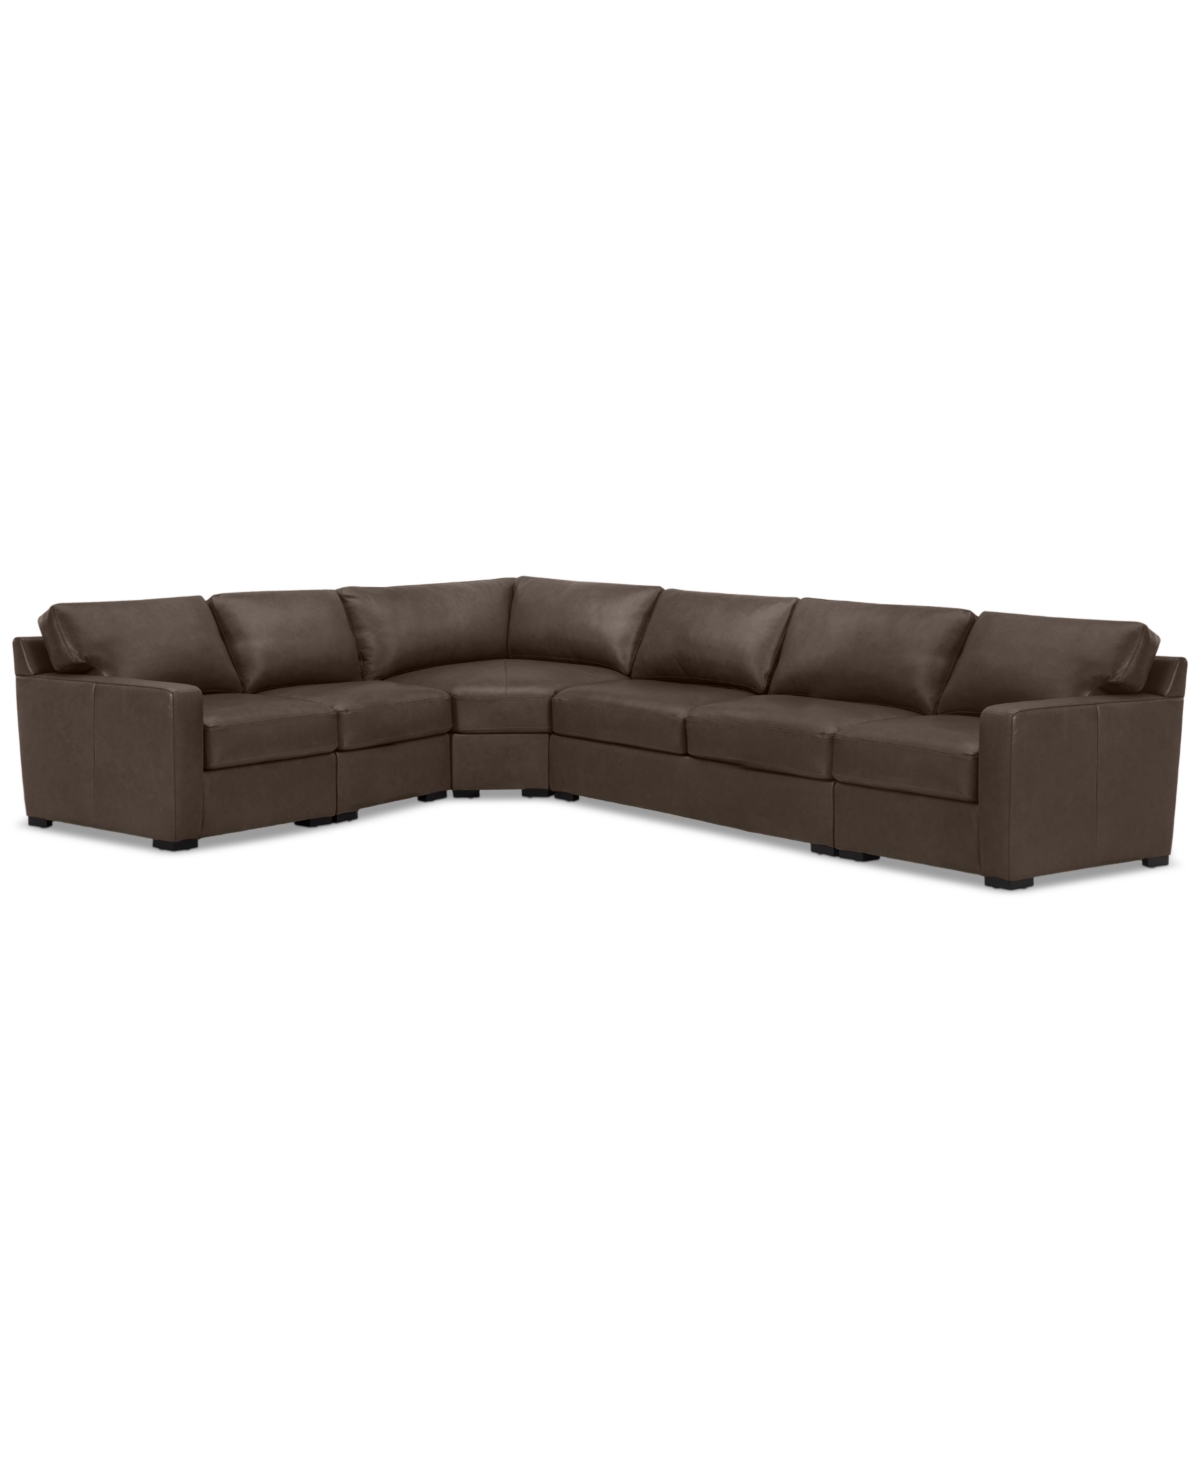 Shop Macy's Radley 148" 5-pc. Leather Wedge L Shape Modular Sectional, Created For  In Chocolate